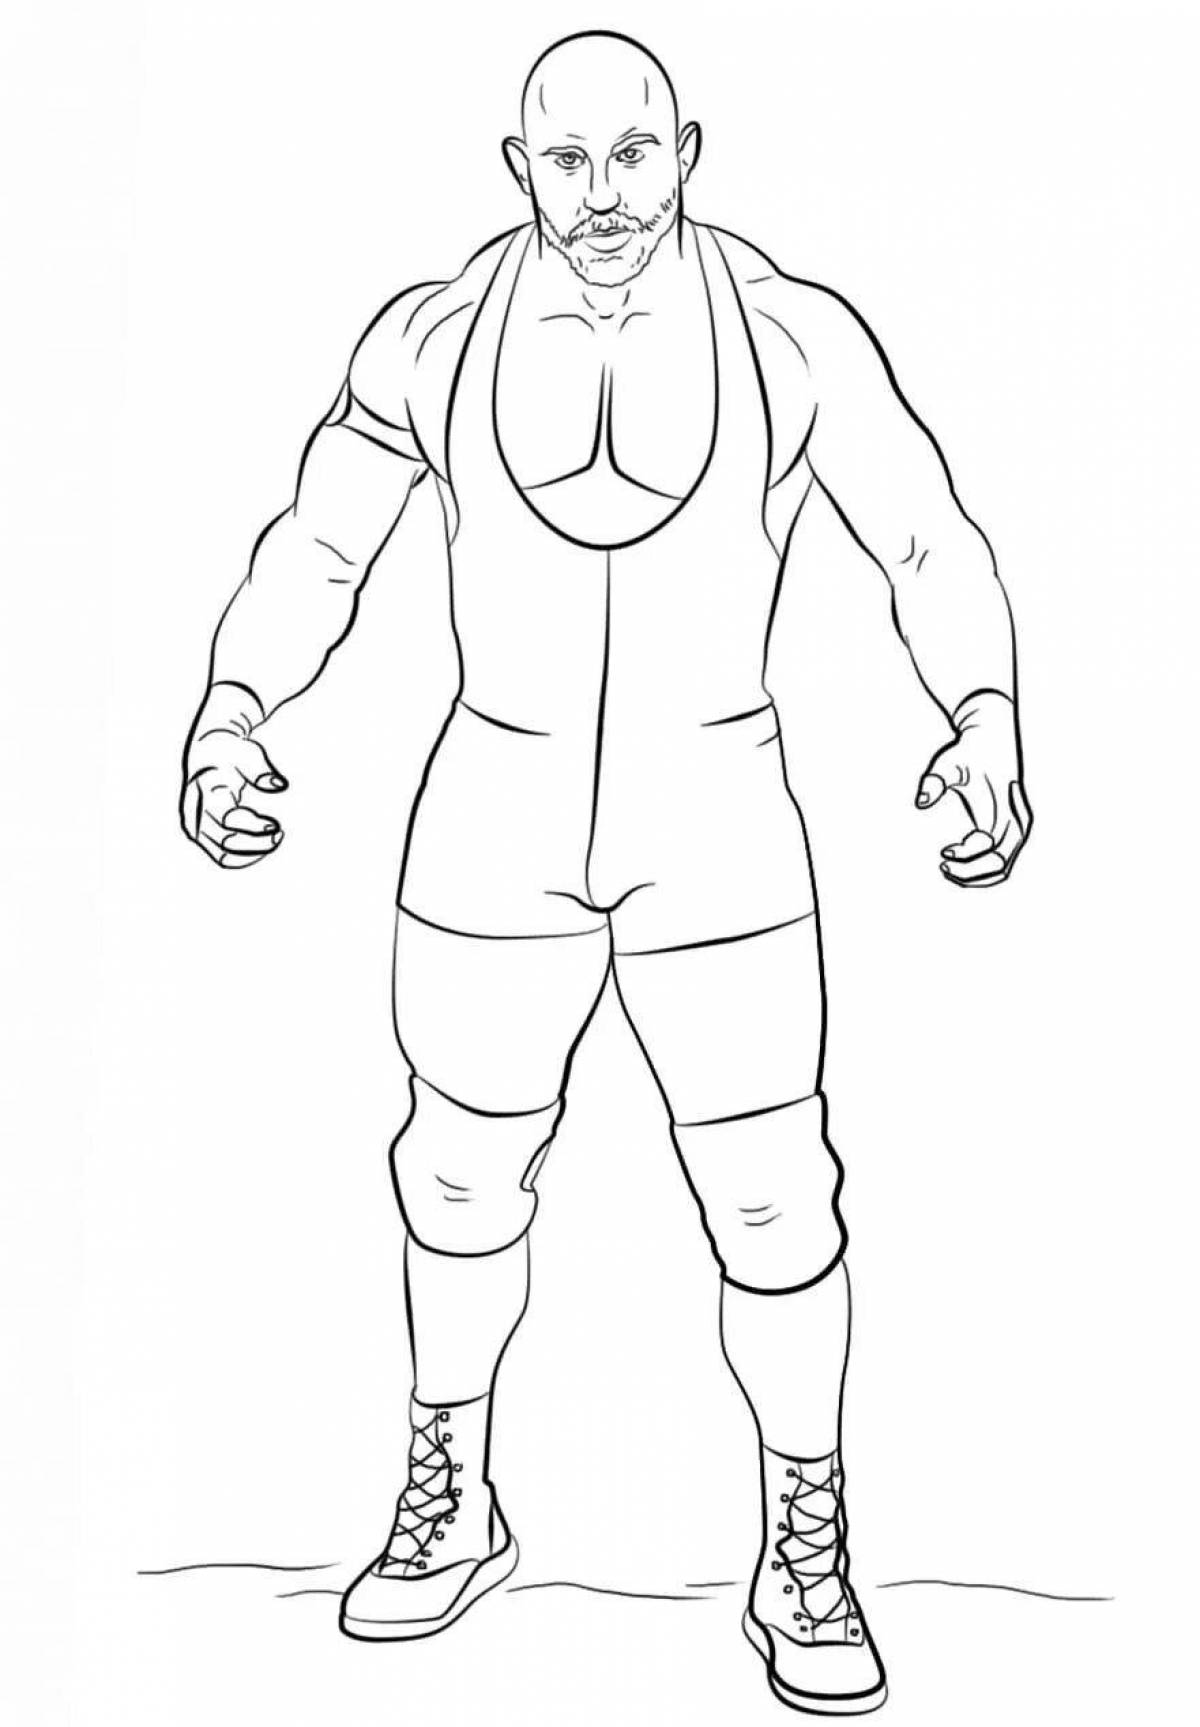 Powerful wrestler coloring pages